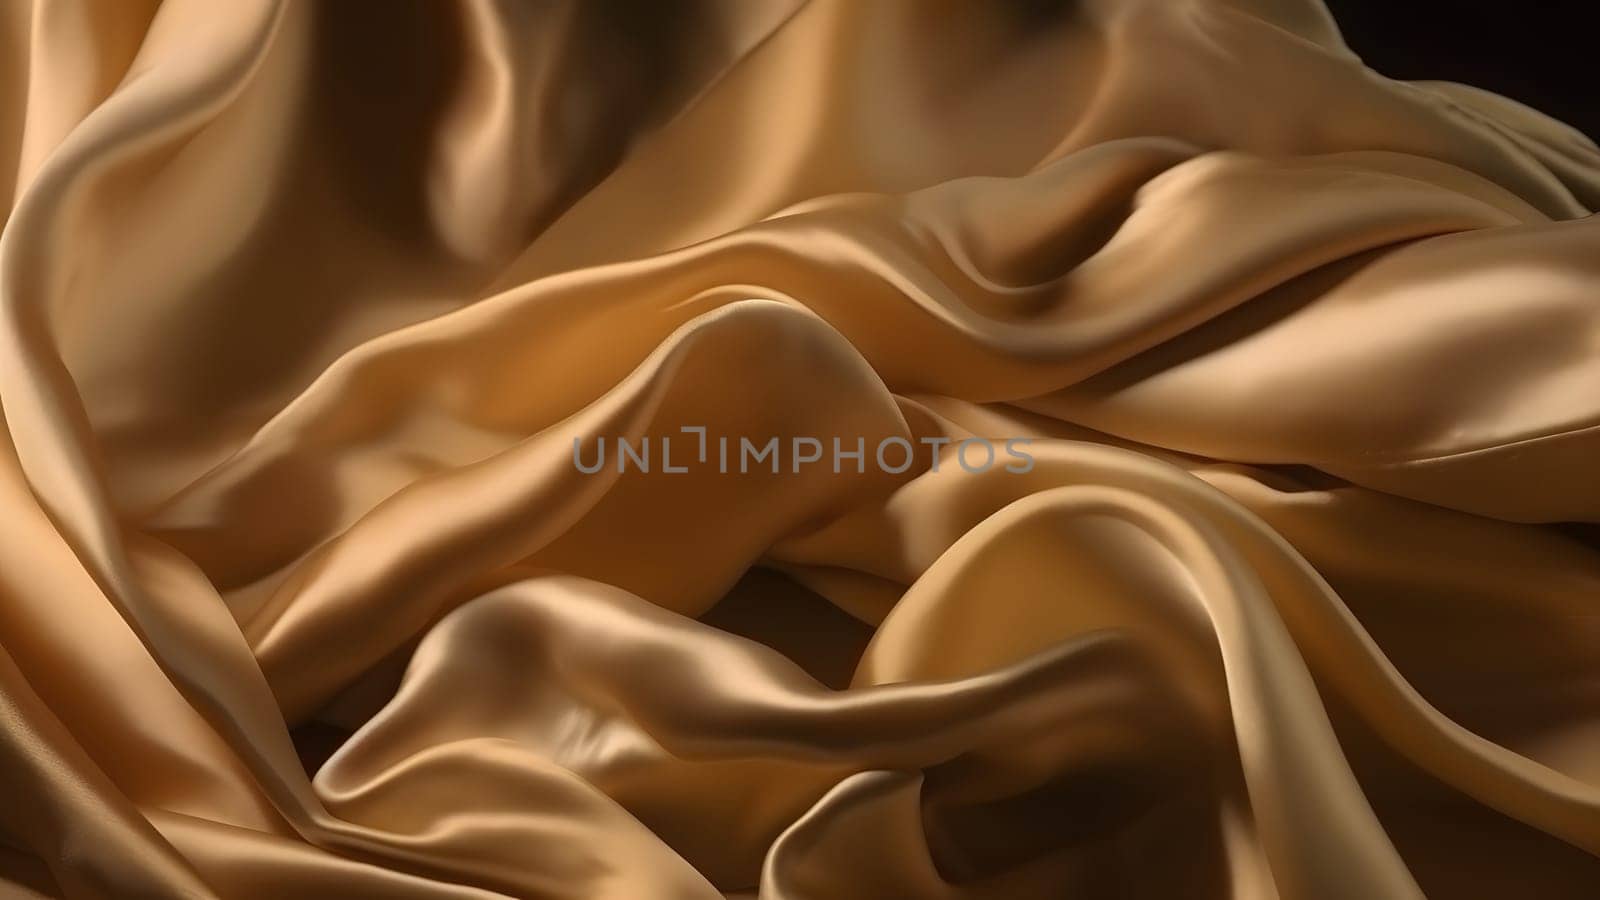 Golden-colored silk surface with folds. Abstract background, neural network generated image by z1b